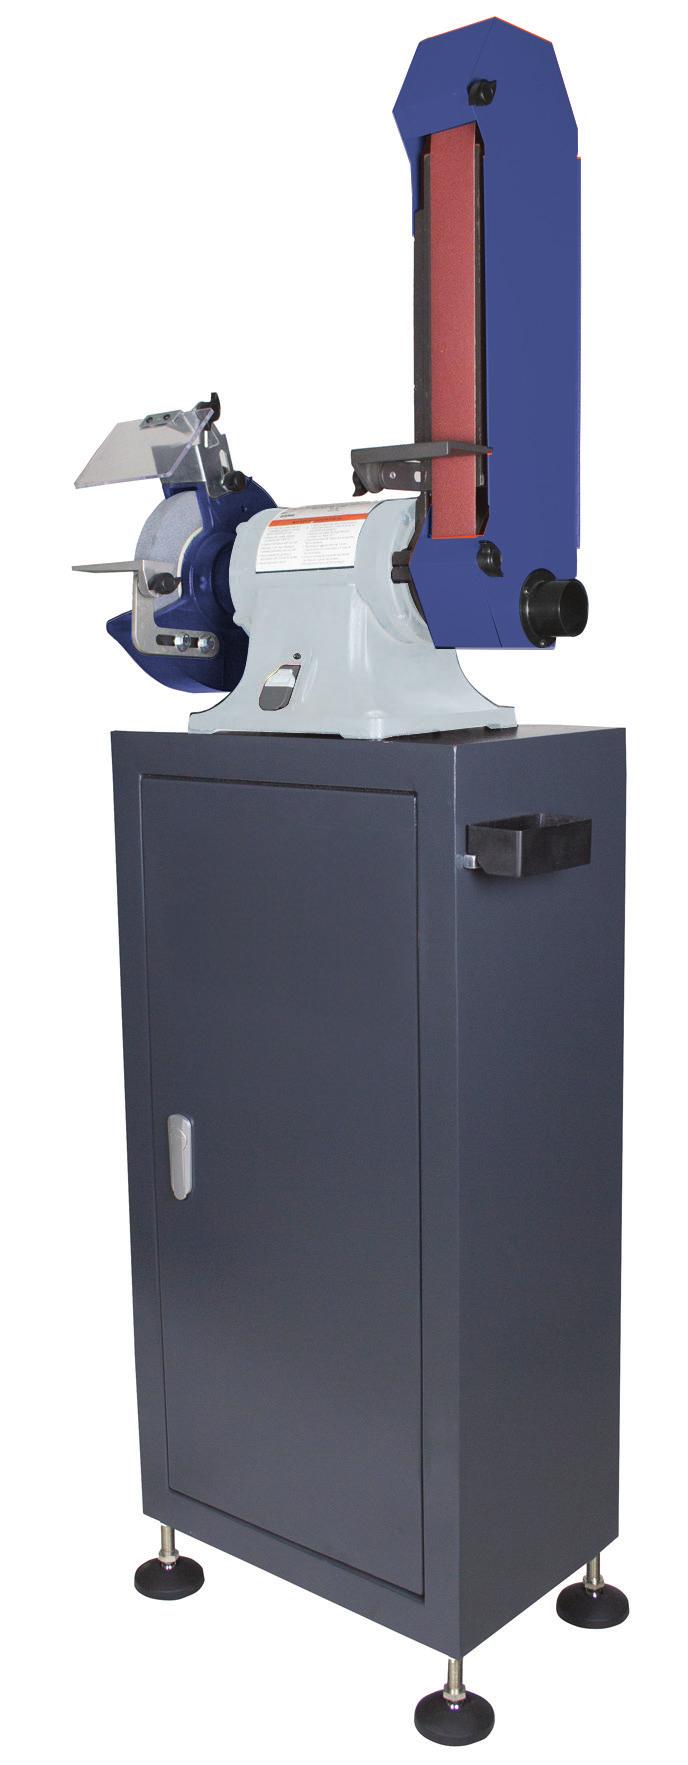 Shown with grinder (grinder not included) BENCH GRINDER PEDESTAL & DUST COLLECTION CABINET Cabinet design allows for bench and belt grinders to be securely mounted while only taking